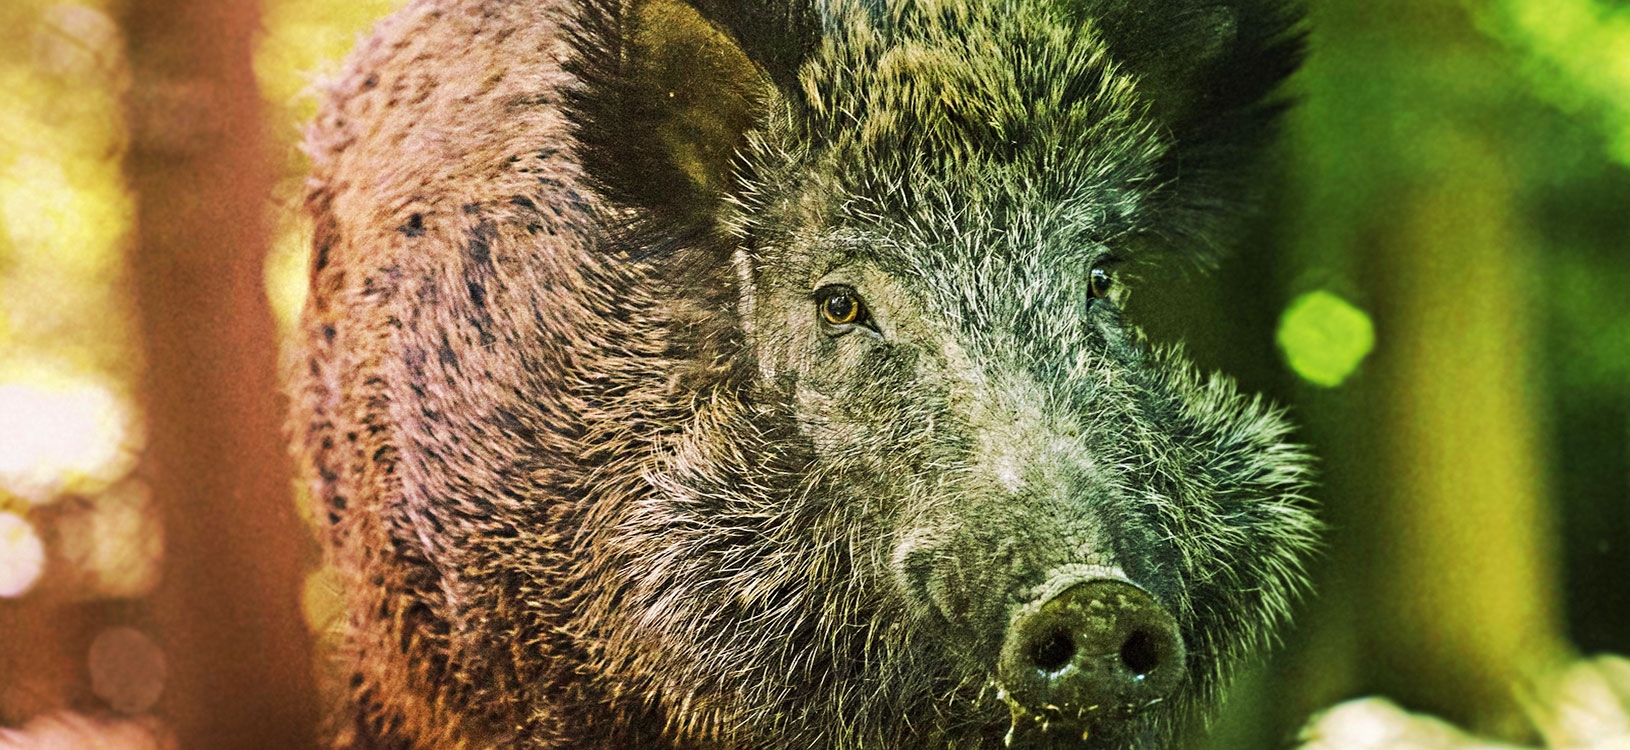 How to hunt wild boar